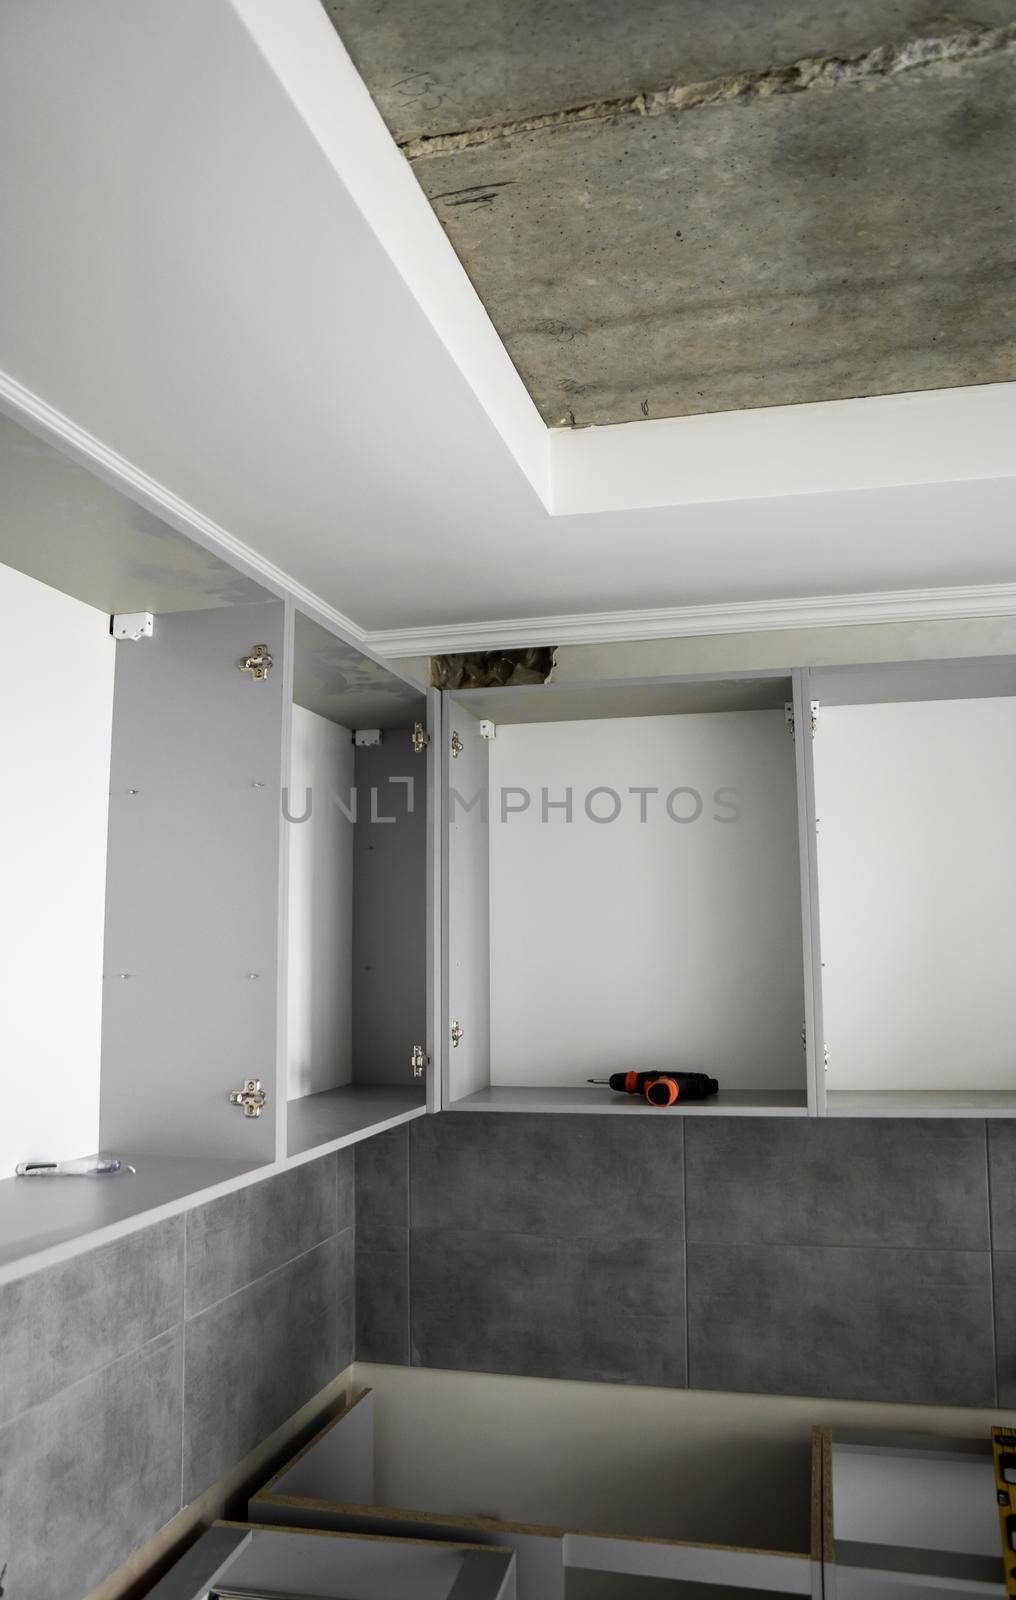 Custom kitchen cabinets installation without a furniture facades mdf. Gray modular kitchen from chipboard material on a various stages of installation in kitchen with a grey tile on floor and walls. by vovsht